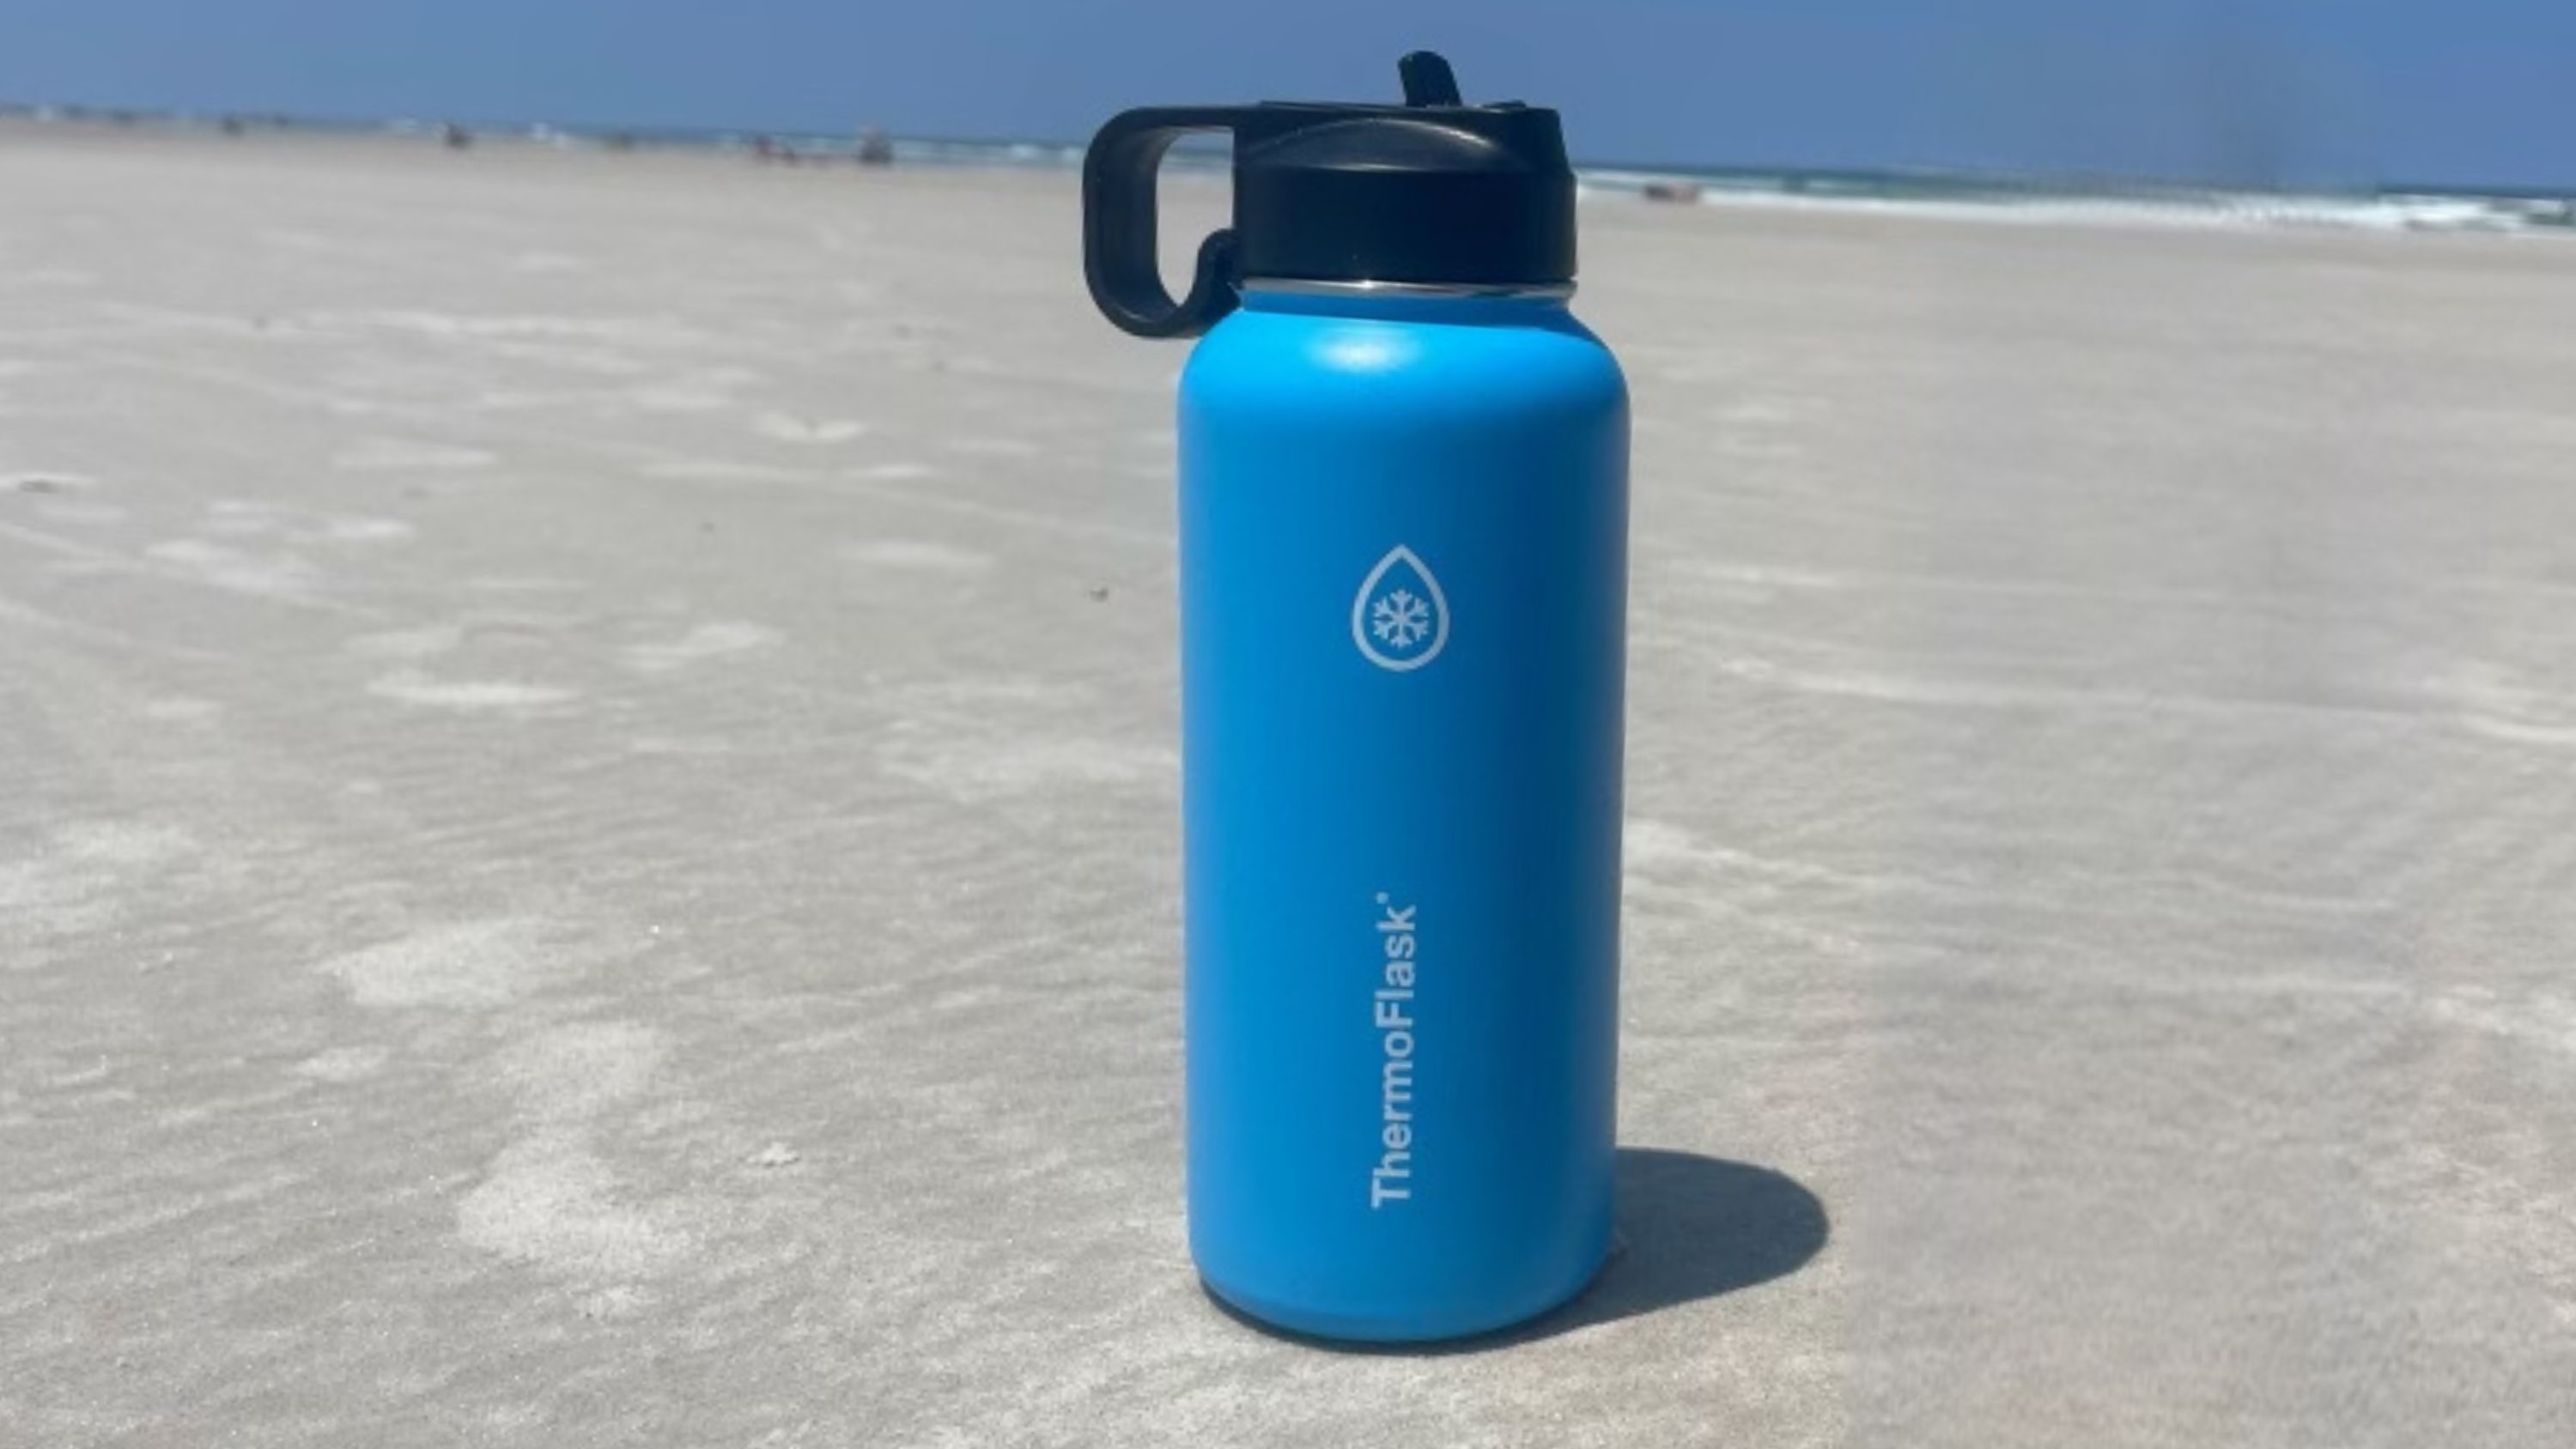 A blue stainless steel water bottle with black lid by ThermoFlask sits on the sand with the ocean in the background